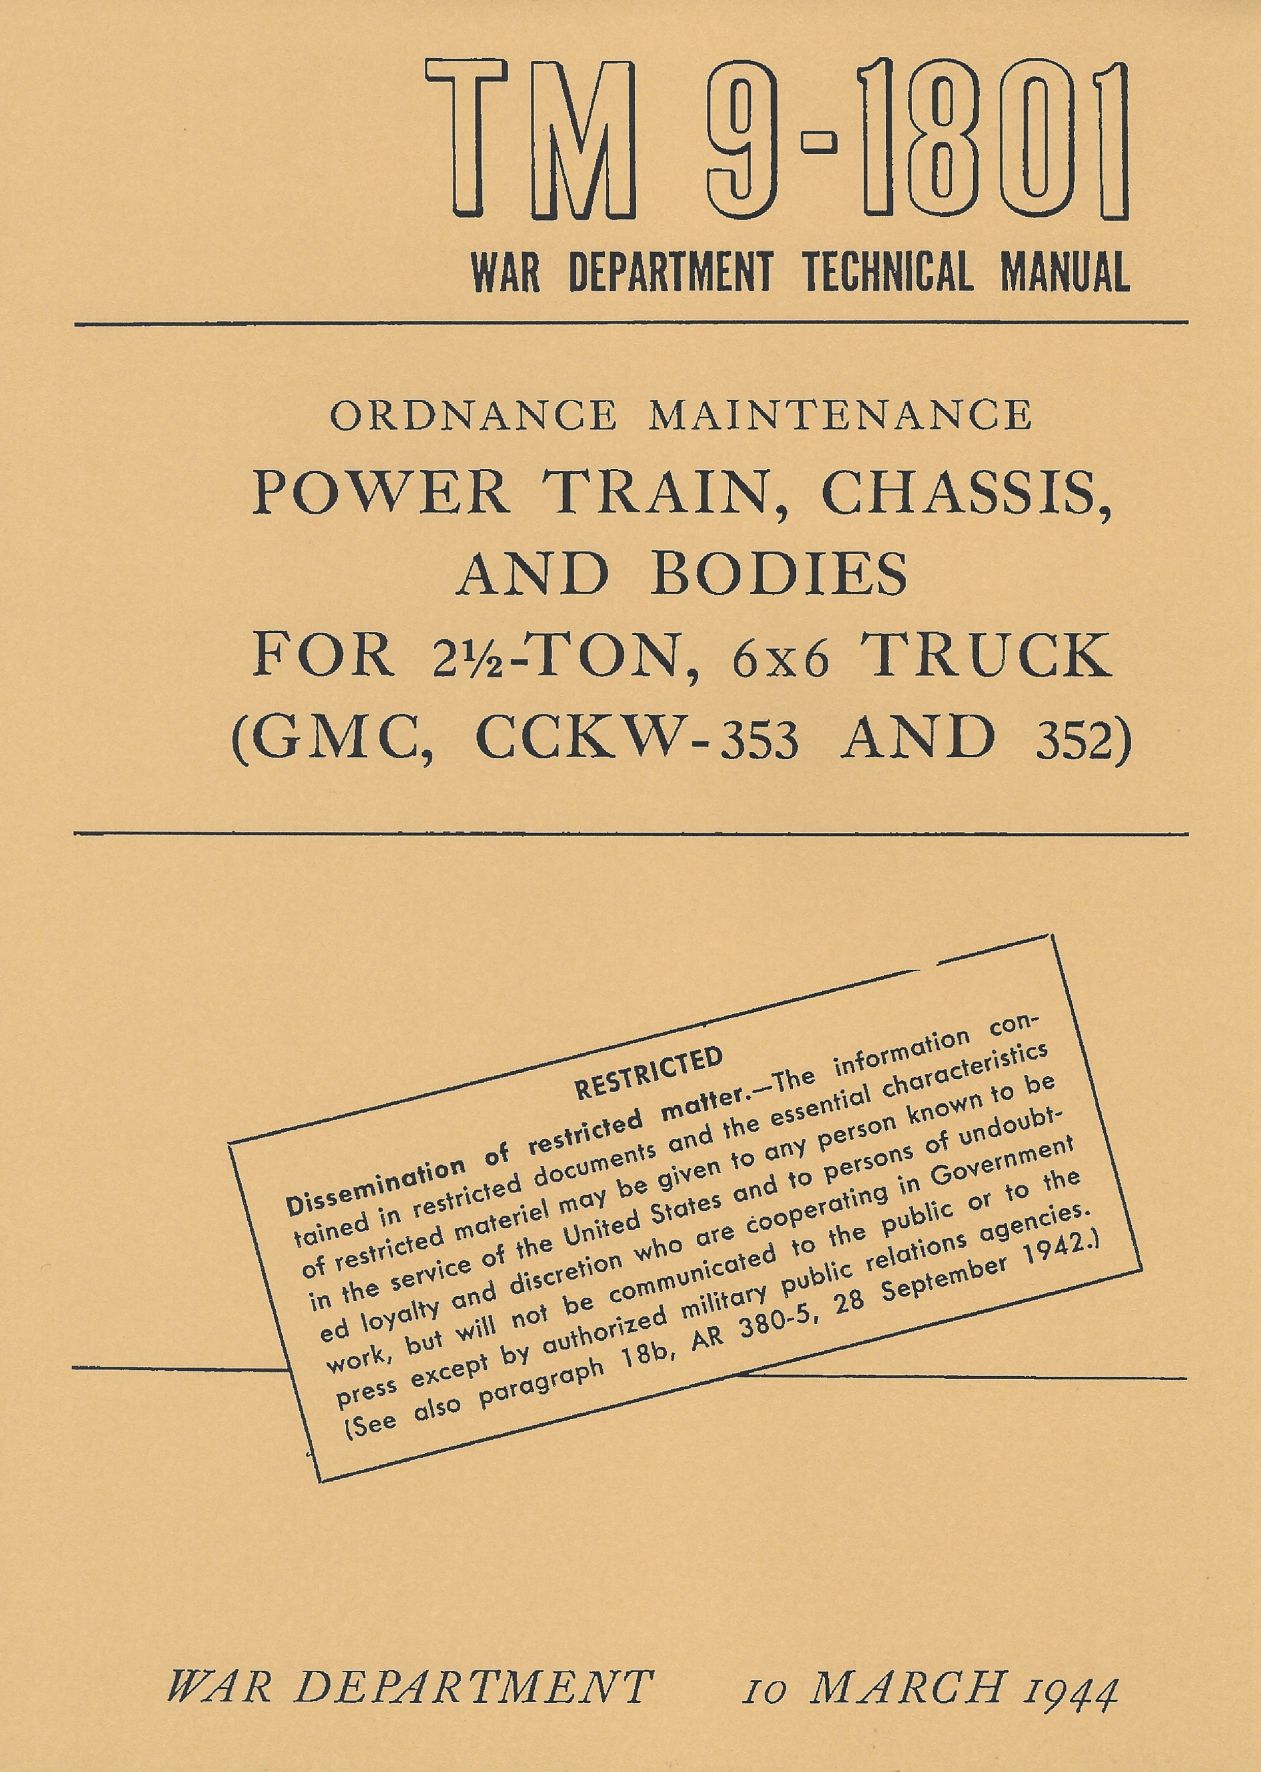 TM 9-1801 US POWER TRAIN, CHASSIS, AND BODIES FOR 2 ½ - TON, 6x6 TRUCK (GMC, CCKW-353 AND 352)